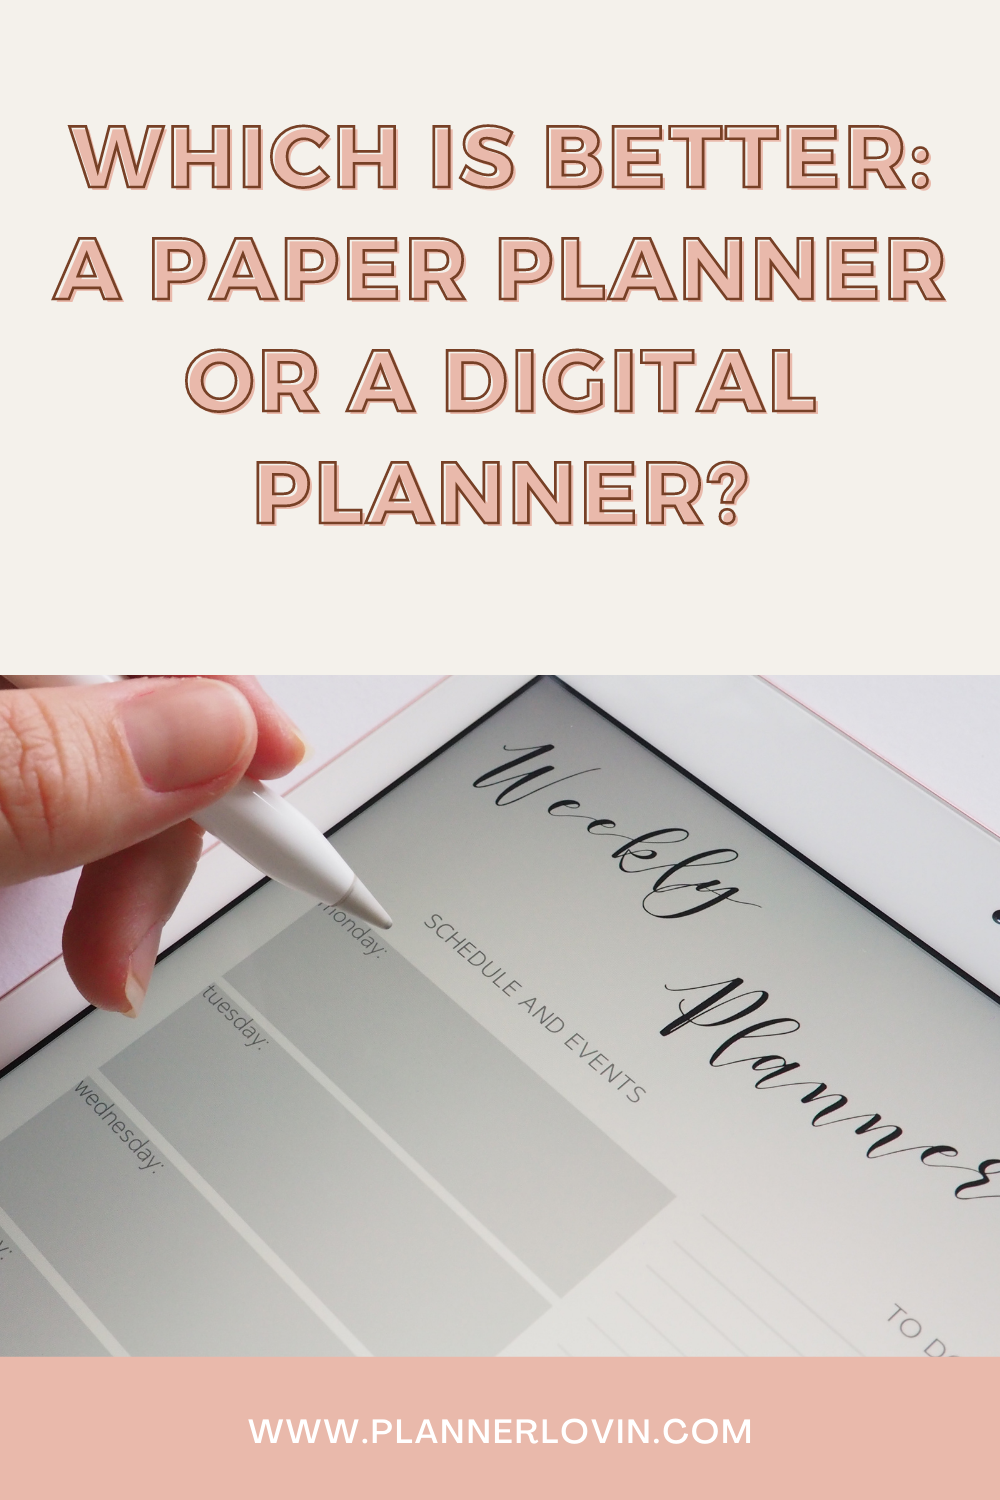 Which is Better: A Paper Planner or a Digital Planner?